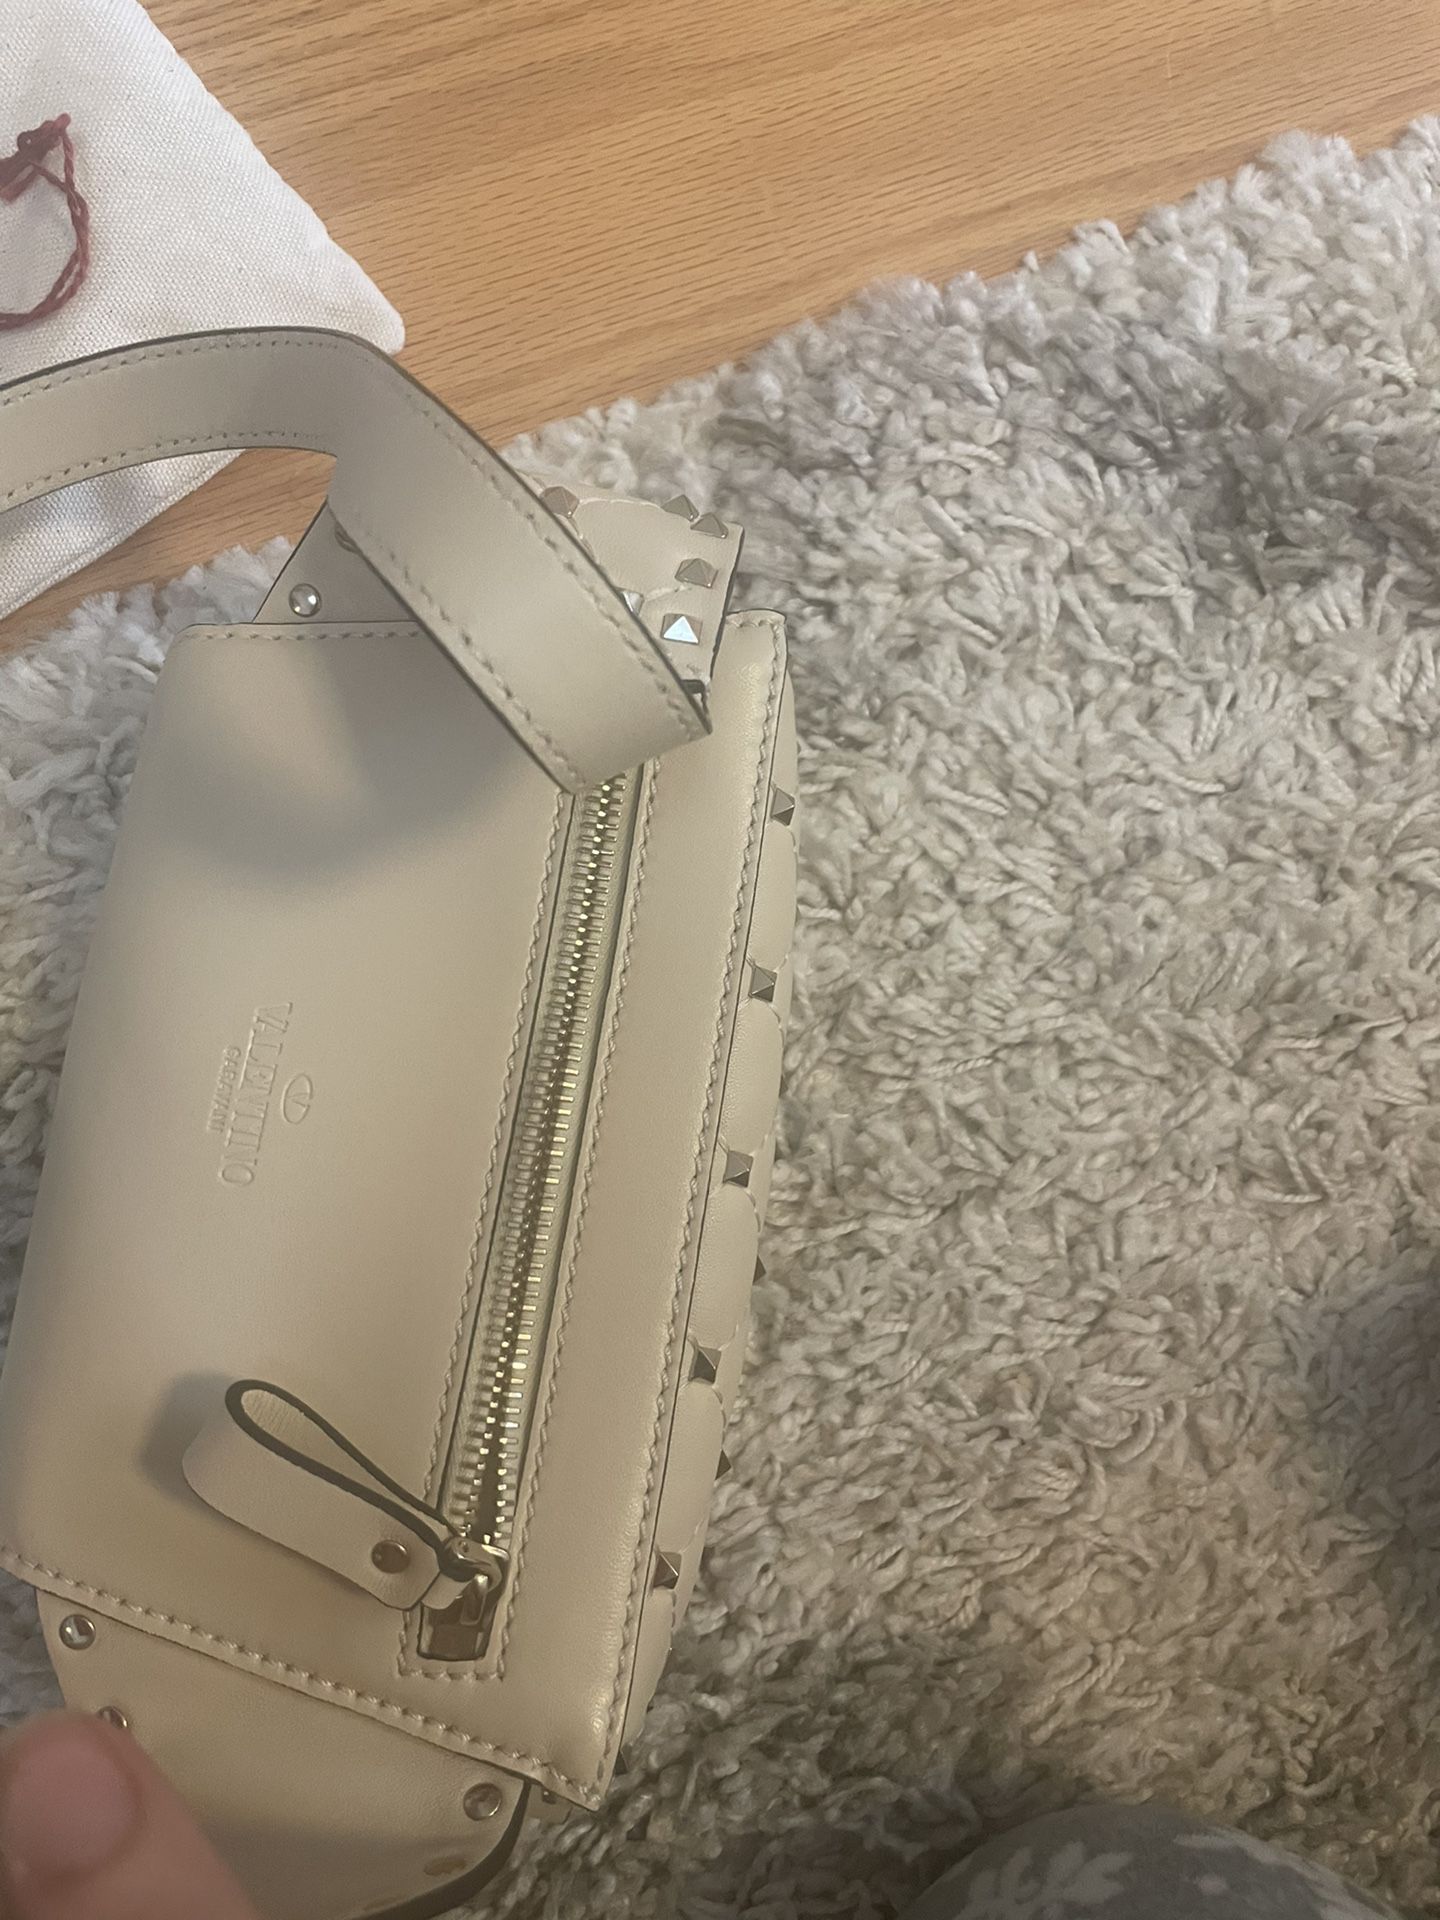 Valentino Waist Bag New With Tags Authentic With Proof Of Purchase